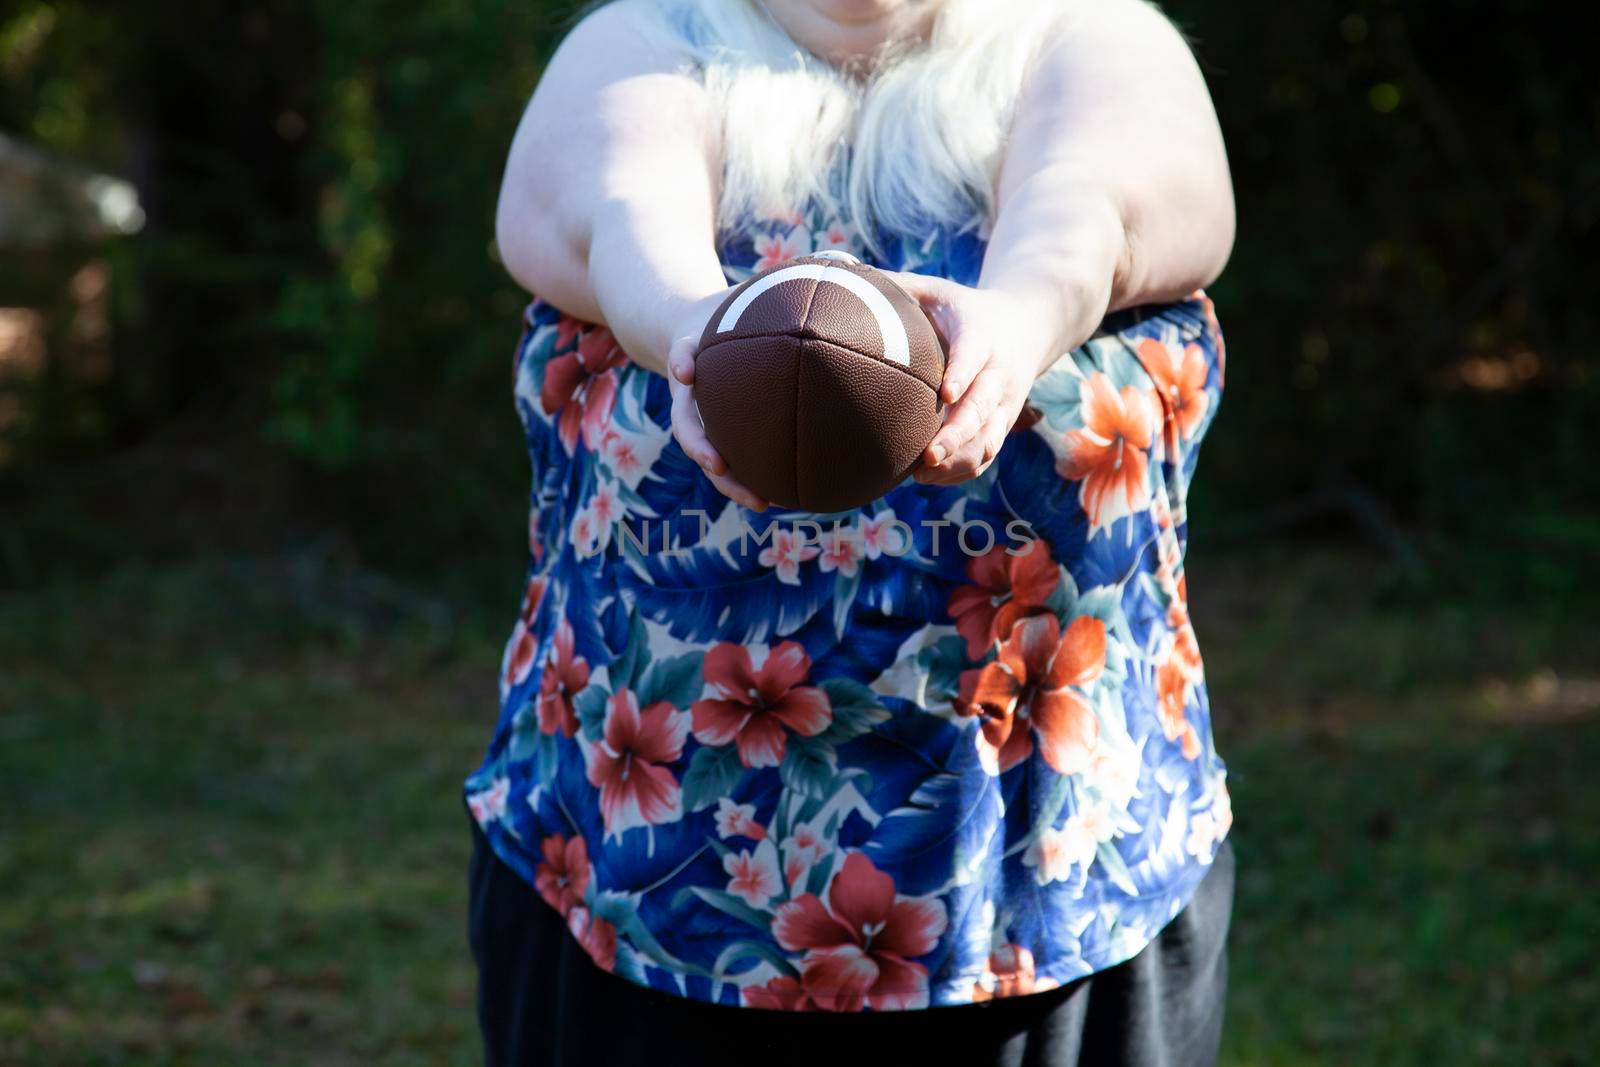 Woman holding a football out, preparing to punt